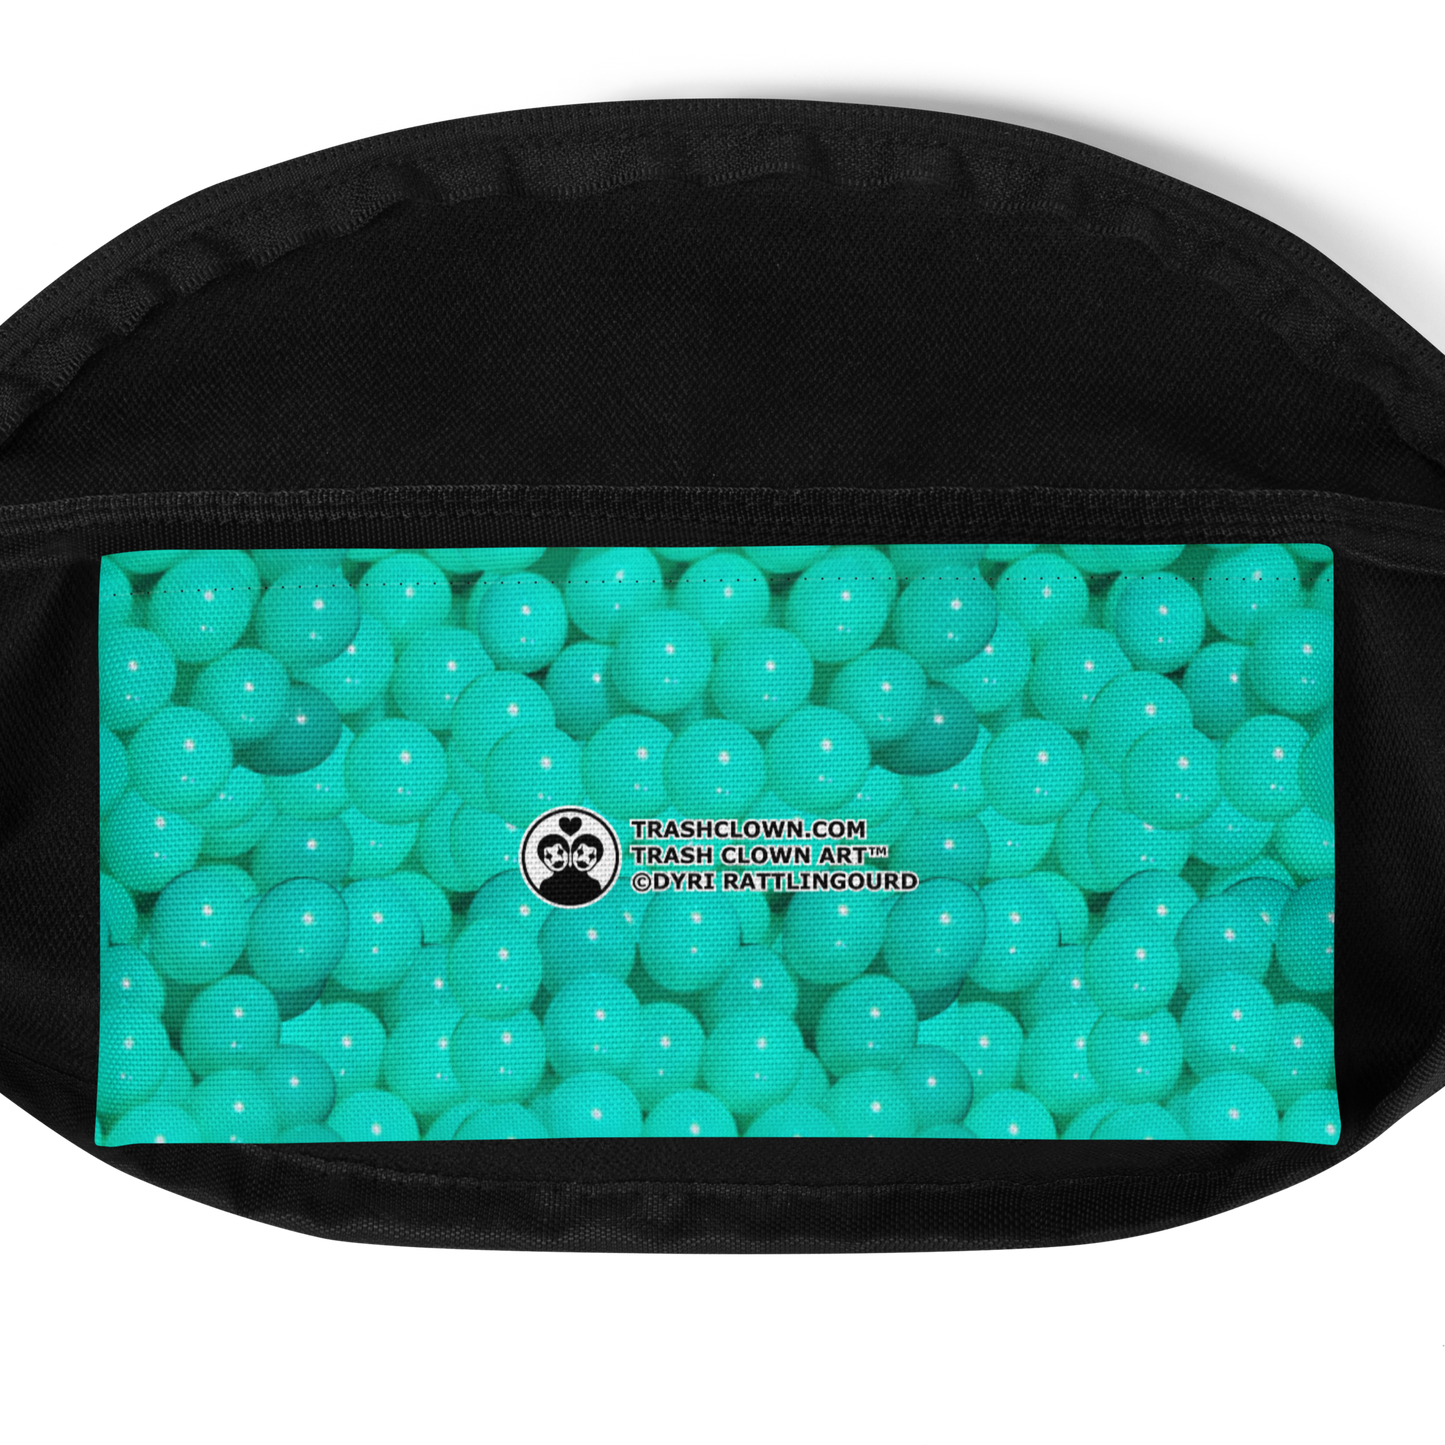 Ball Pit in Teal Fanny Pack